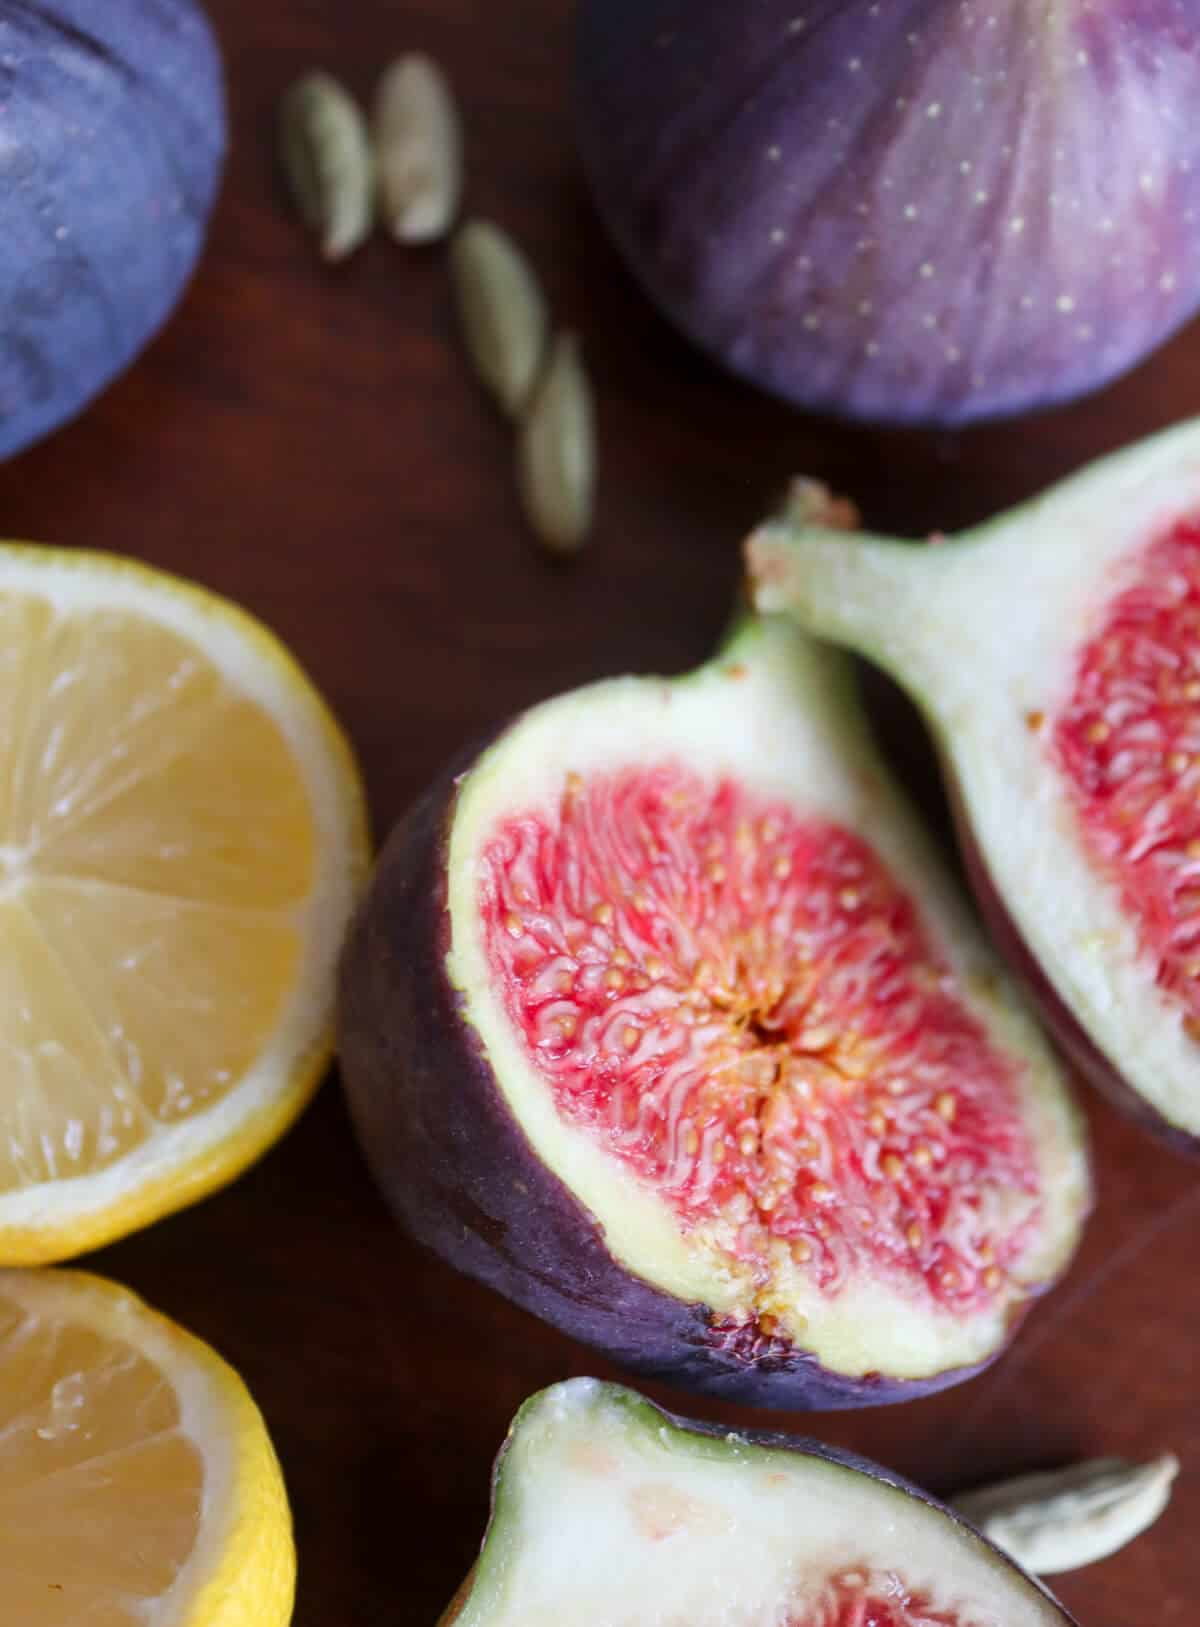 A close up of figs, lemon and cardamom seeds. 